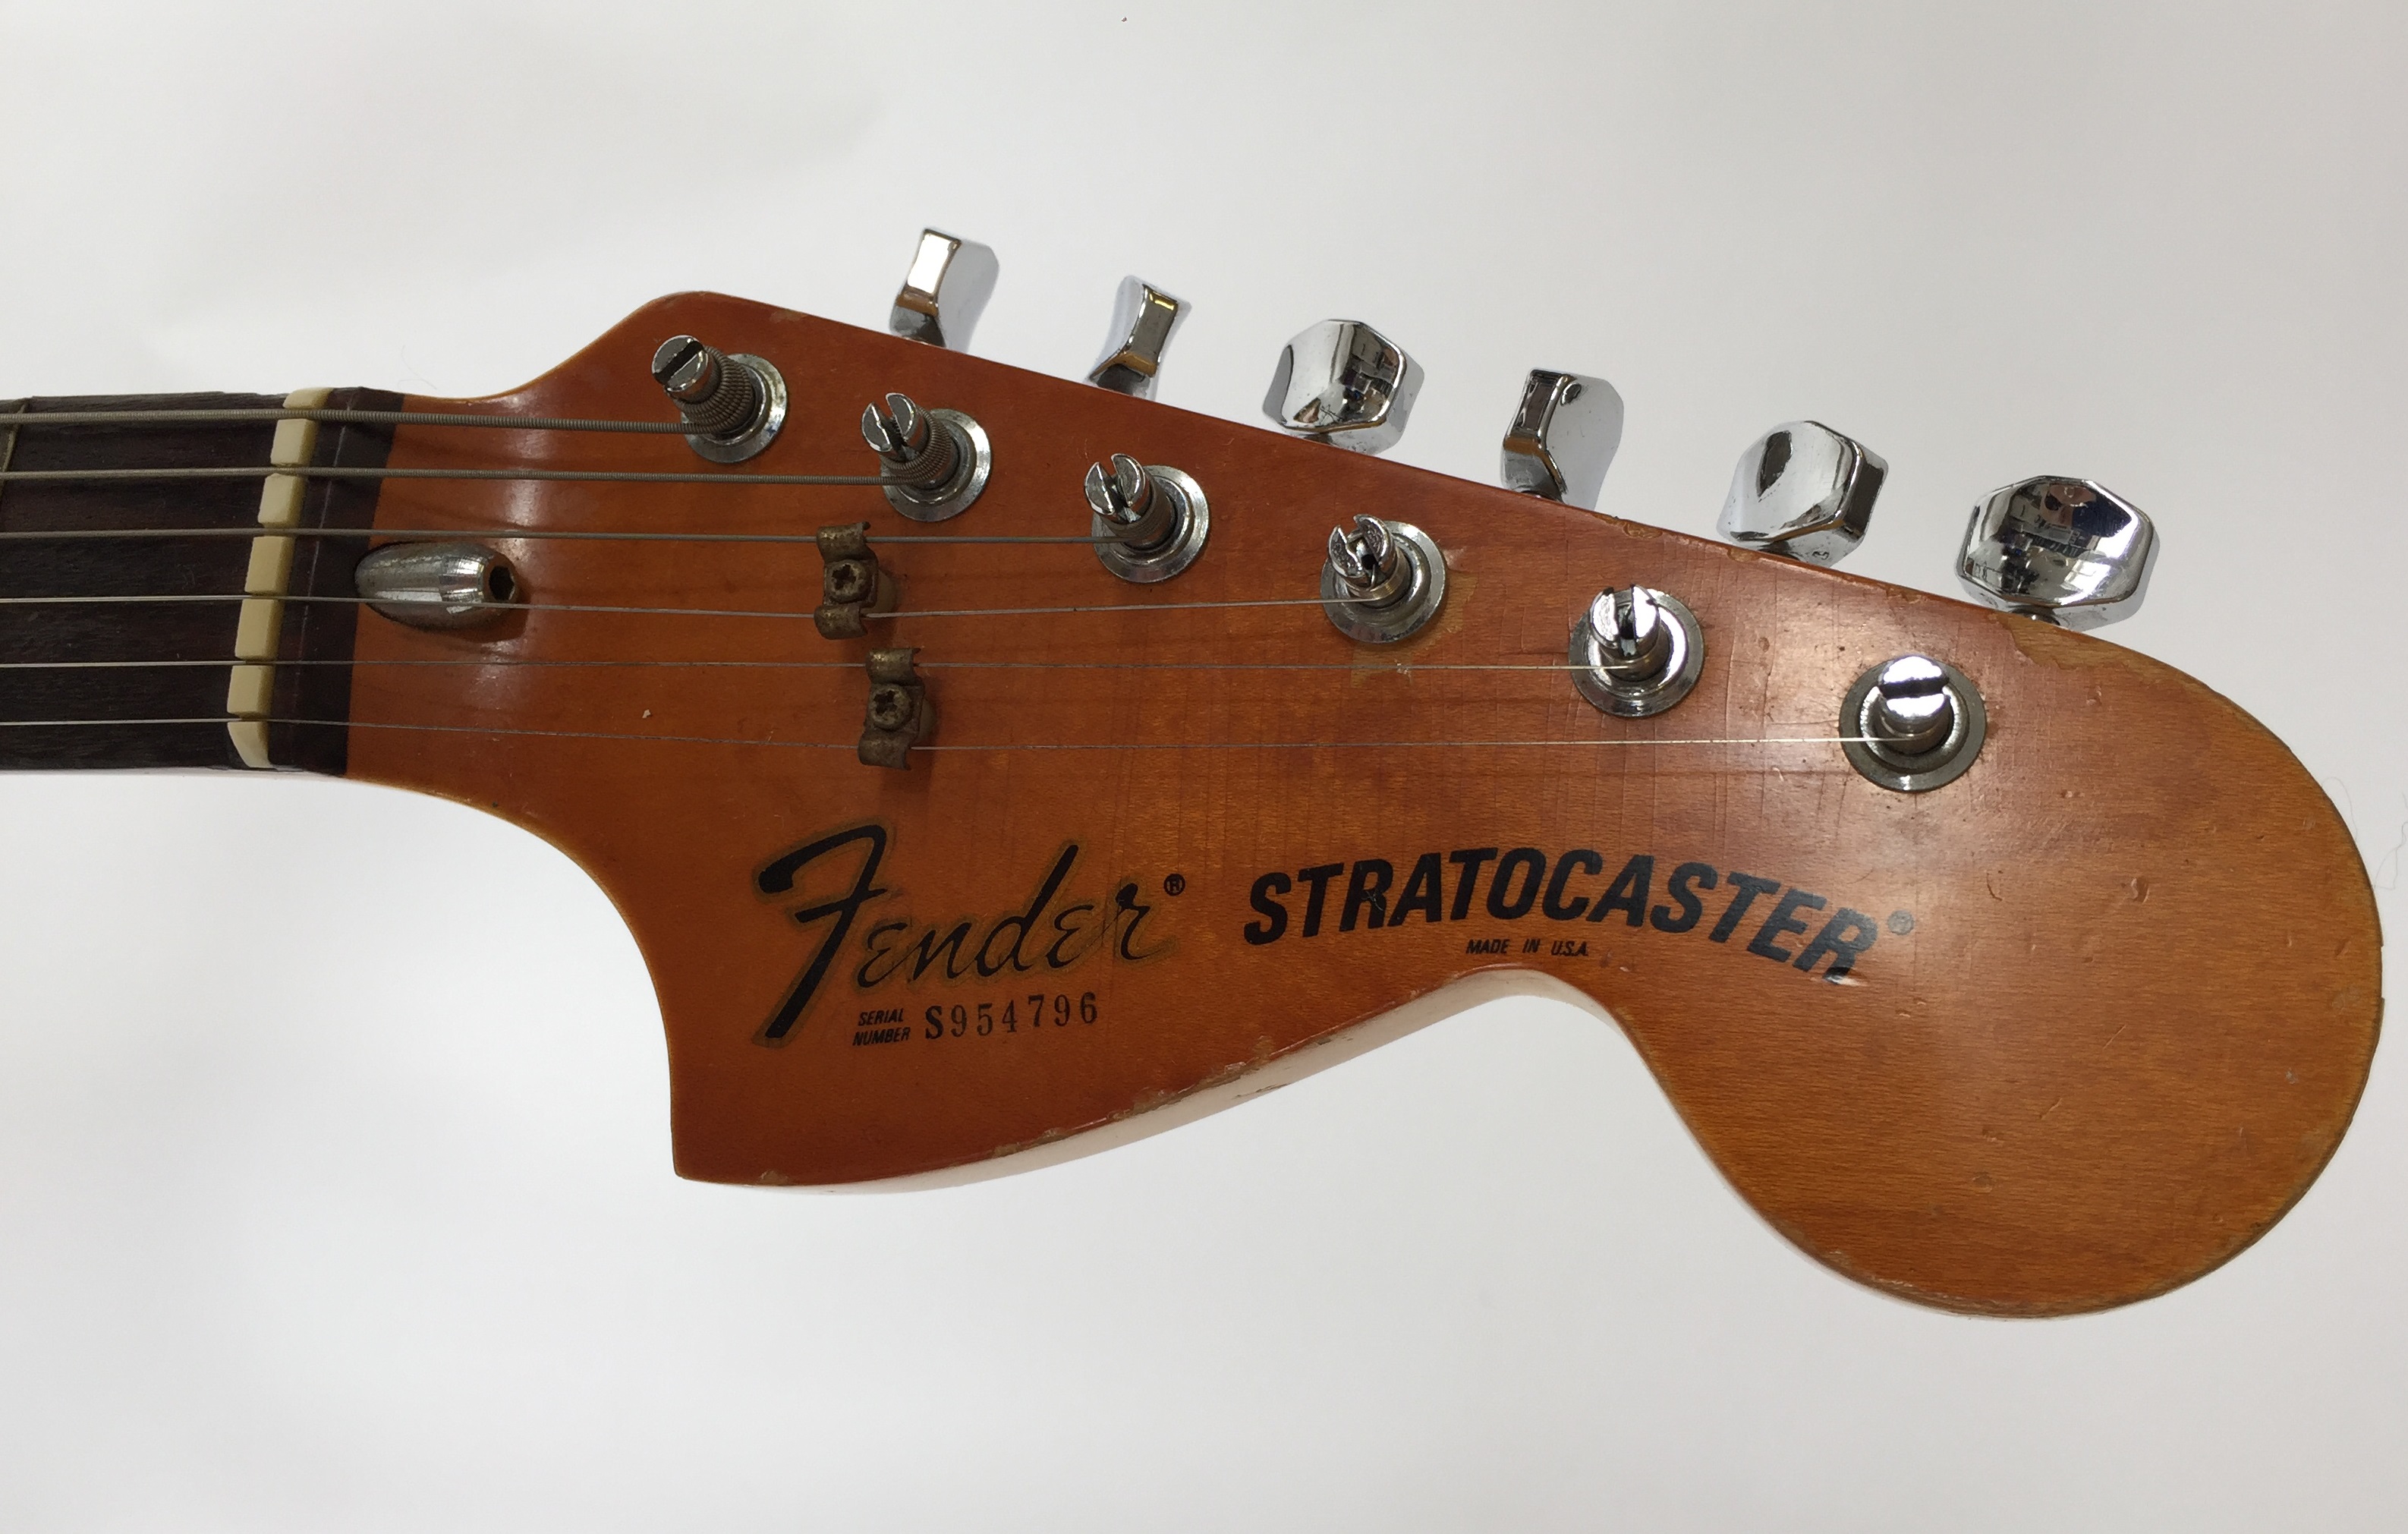 FENDER STRATOCASTER ANTIGUA 1978 - Fender Stratocaster Antigua 1978 with maple and rosewood necks. - Image 3 of 8